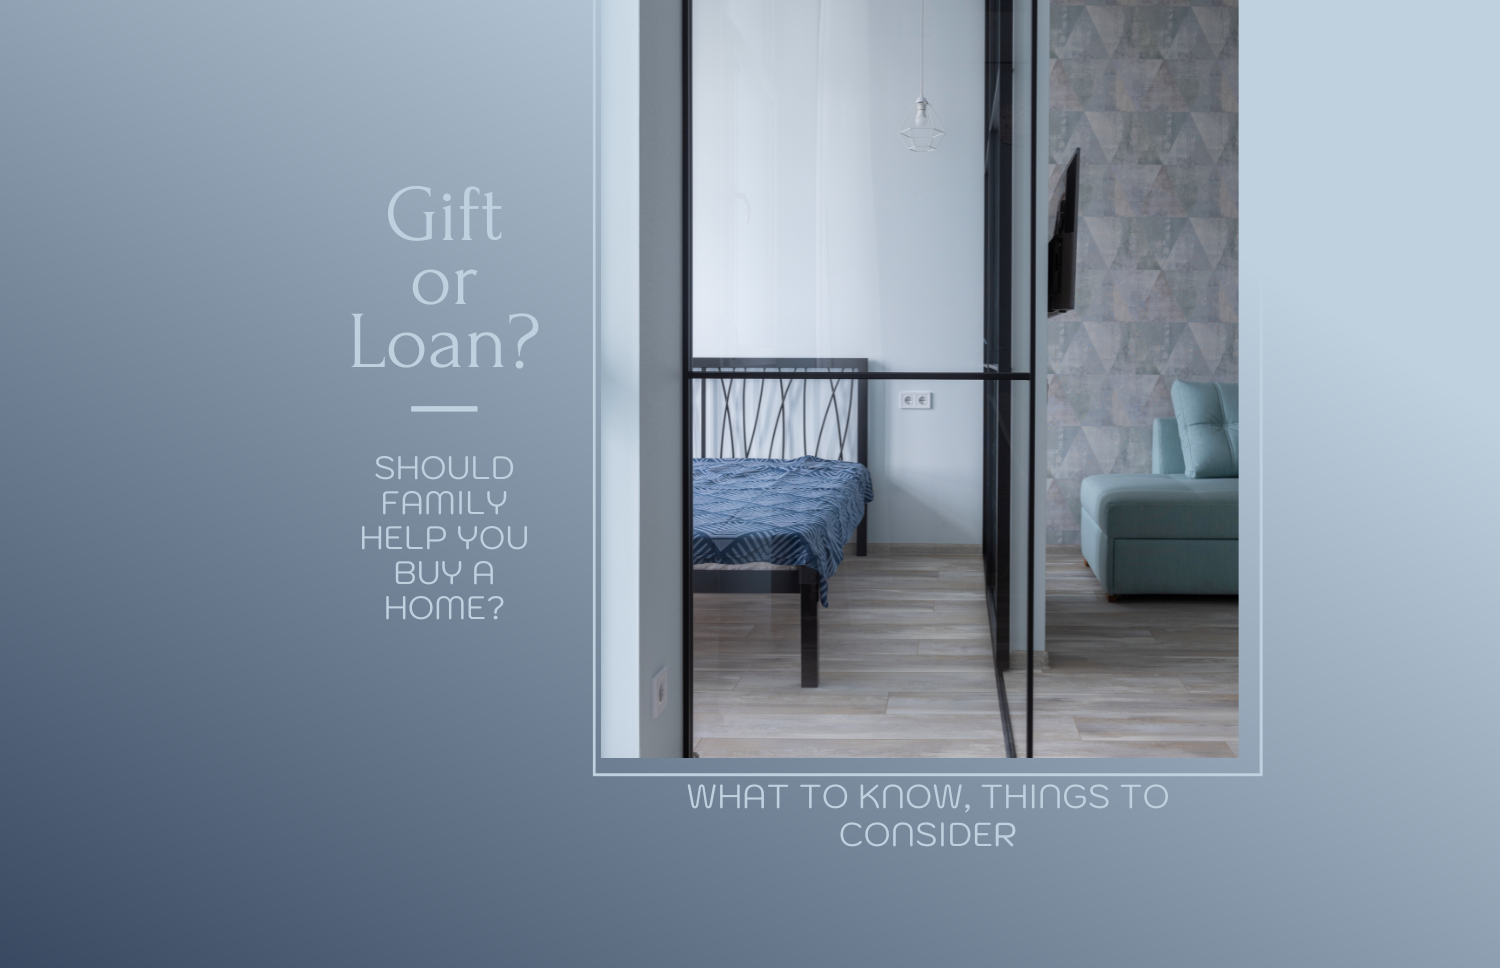 Gift or Loan — Should Family Help You Buy a Home